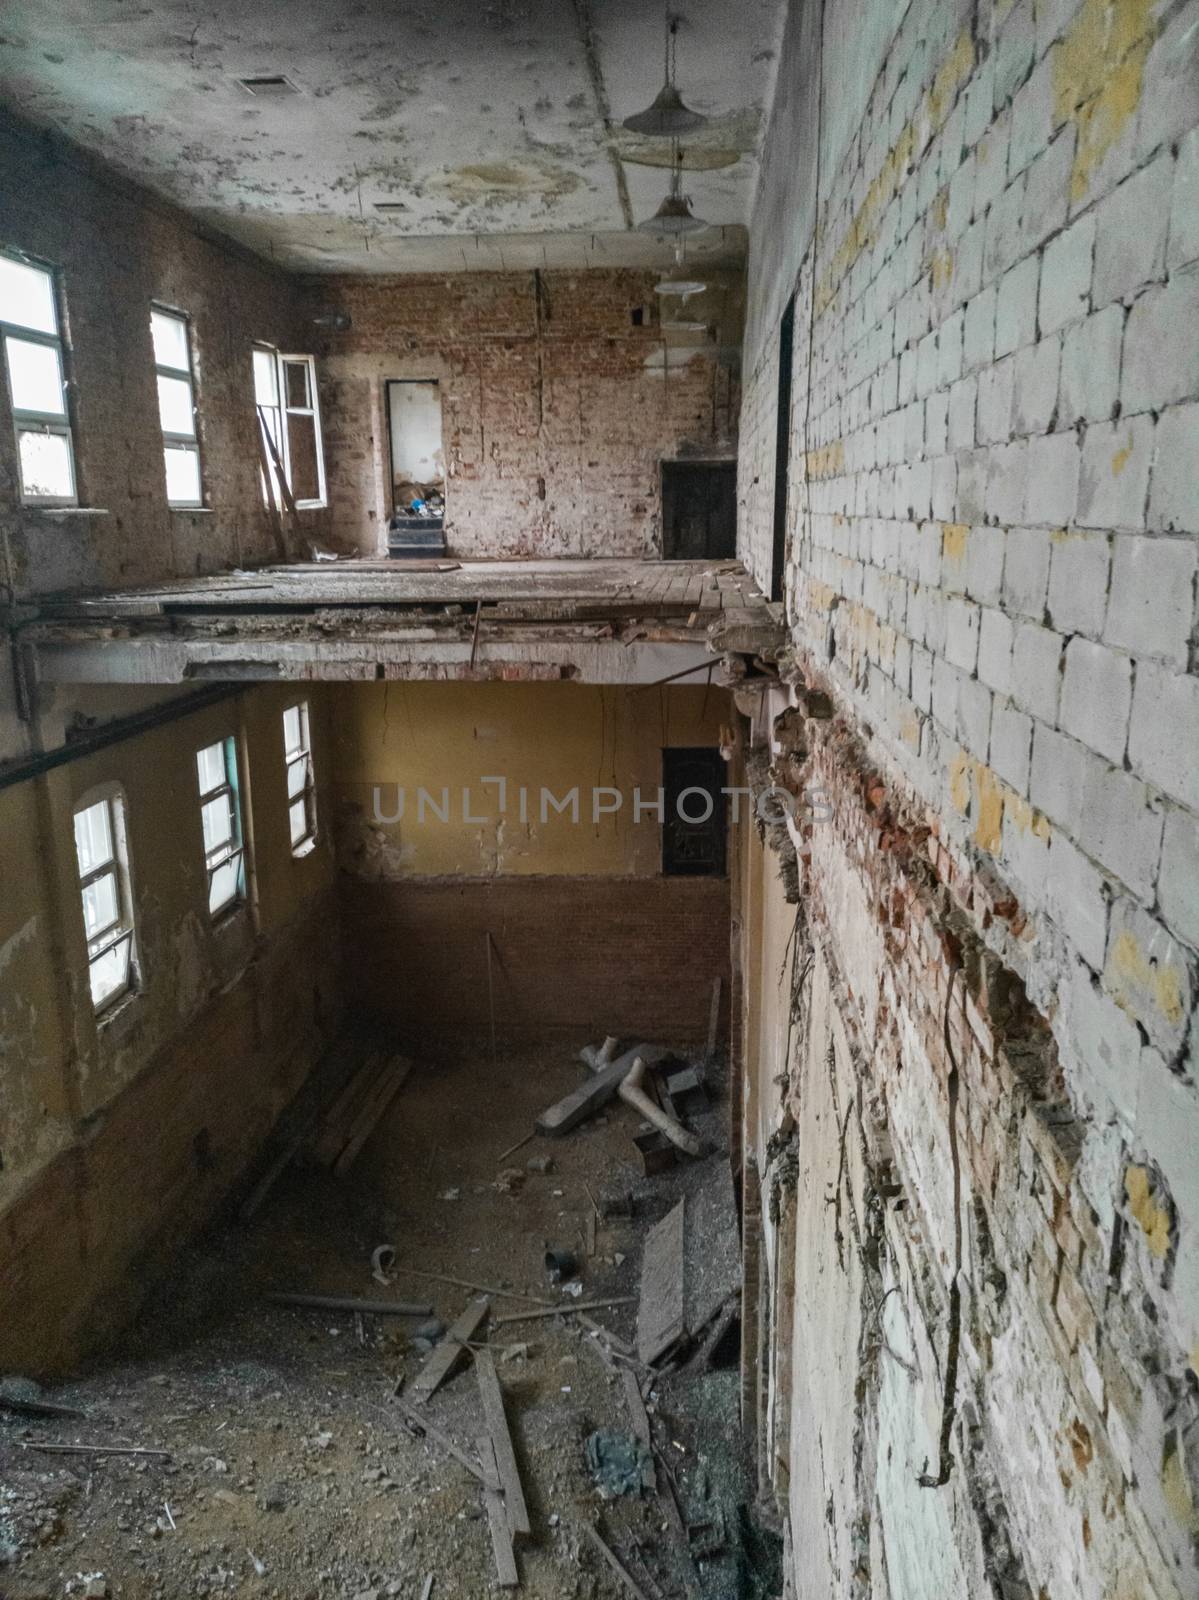 Urban exploration of ruins of old building with floor without floor